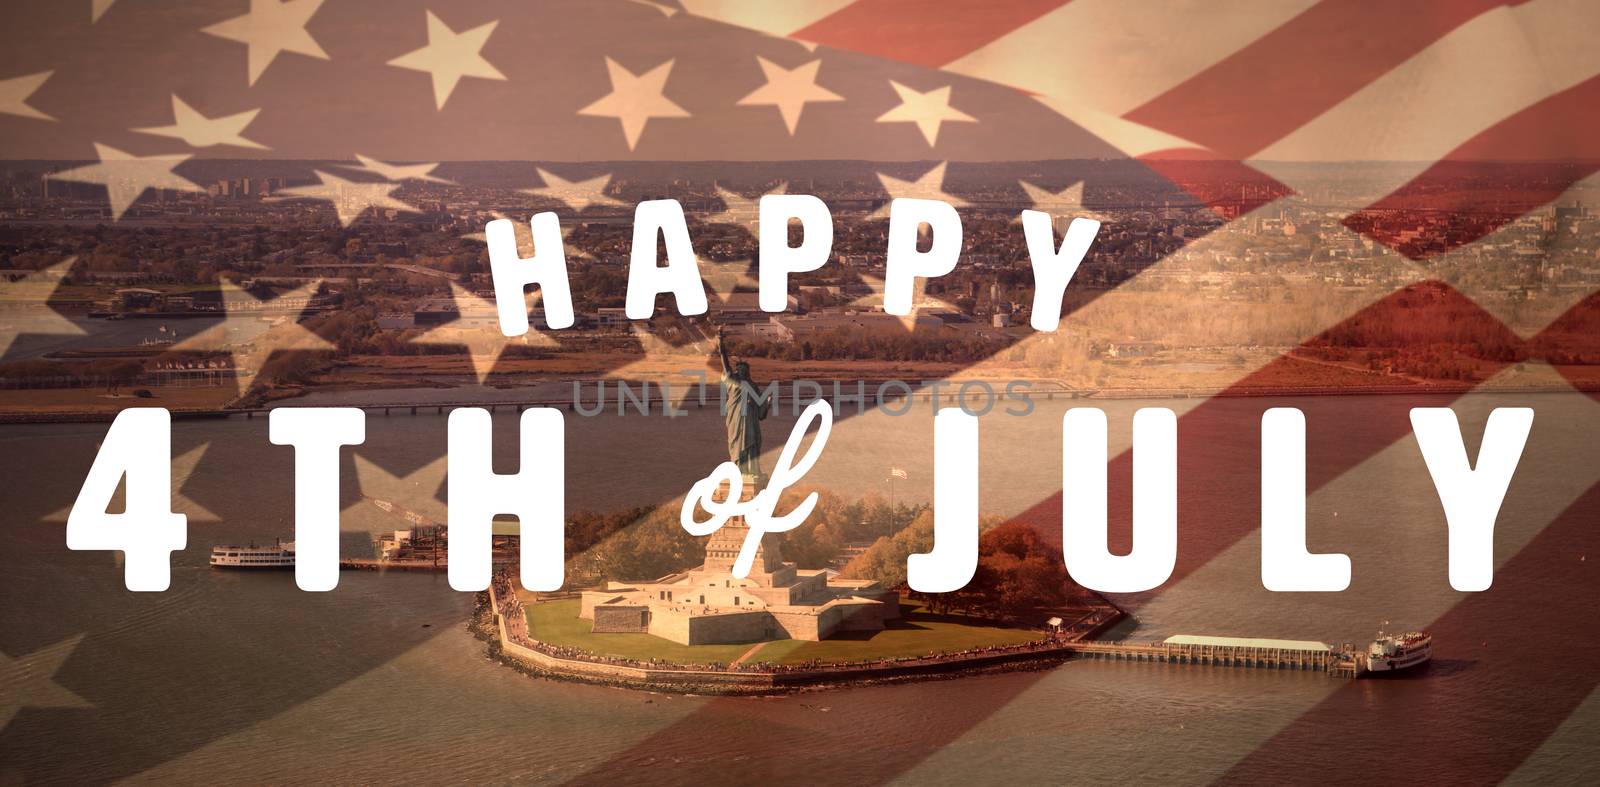 Digitally generated image of happy 4th of july text against high angle view of statue of liberty in sea